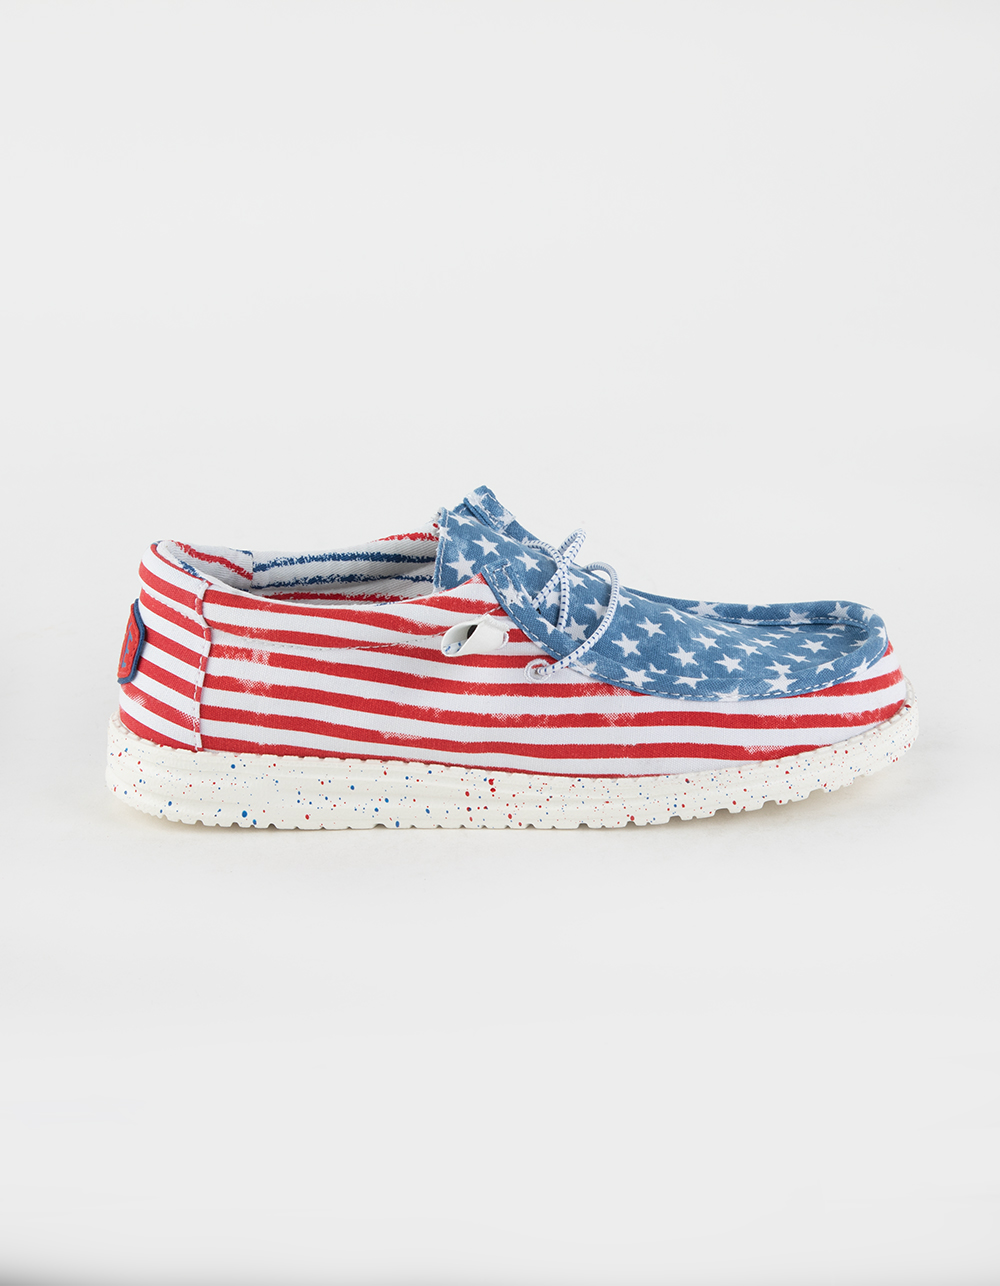 HEY DUDE Wally Patriotic Mens Shoes - RED COMBO | Tillys